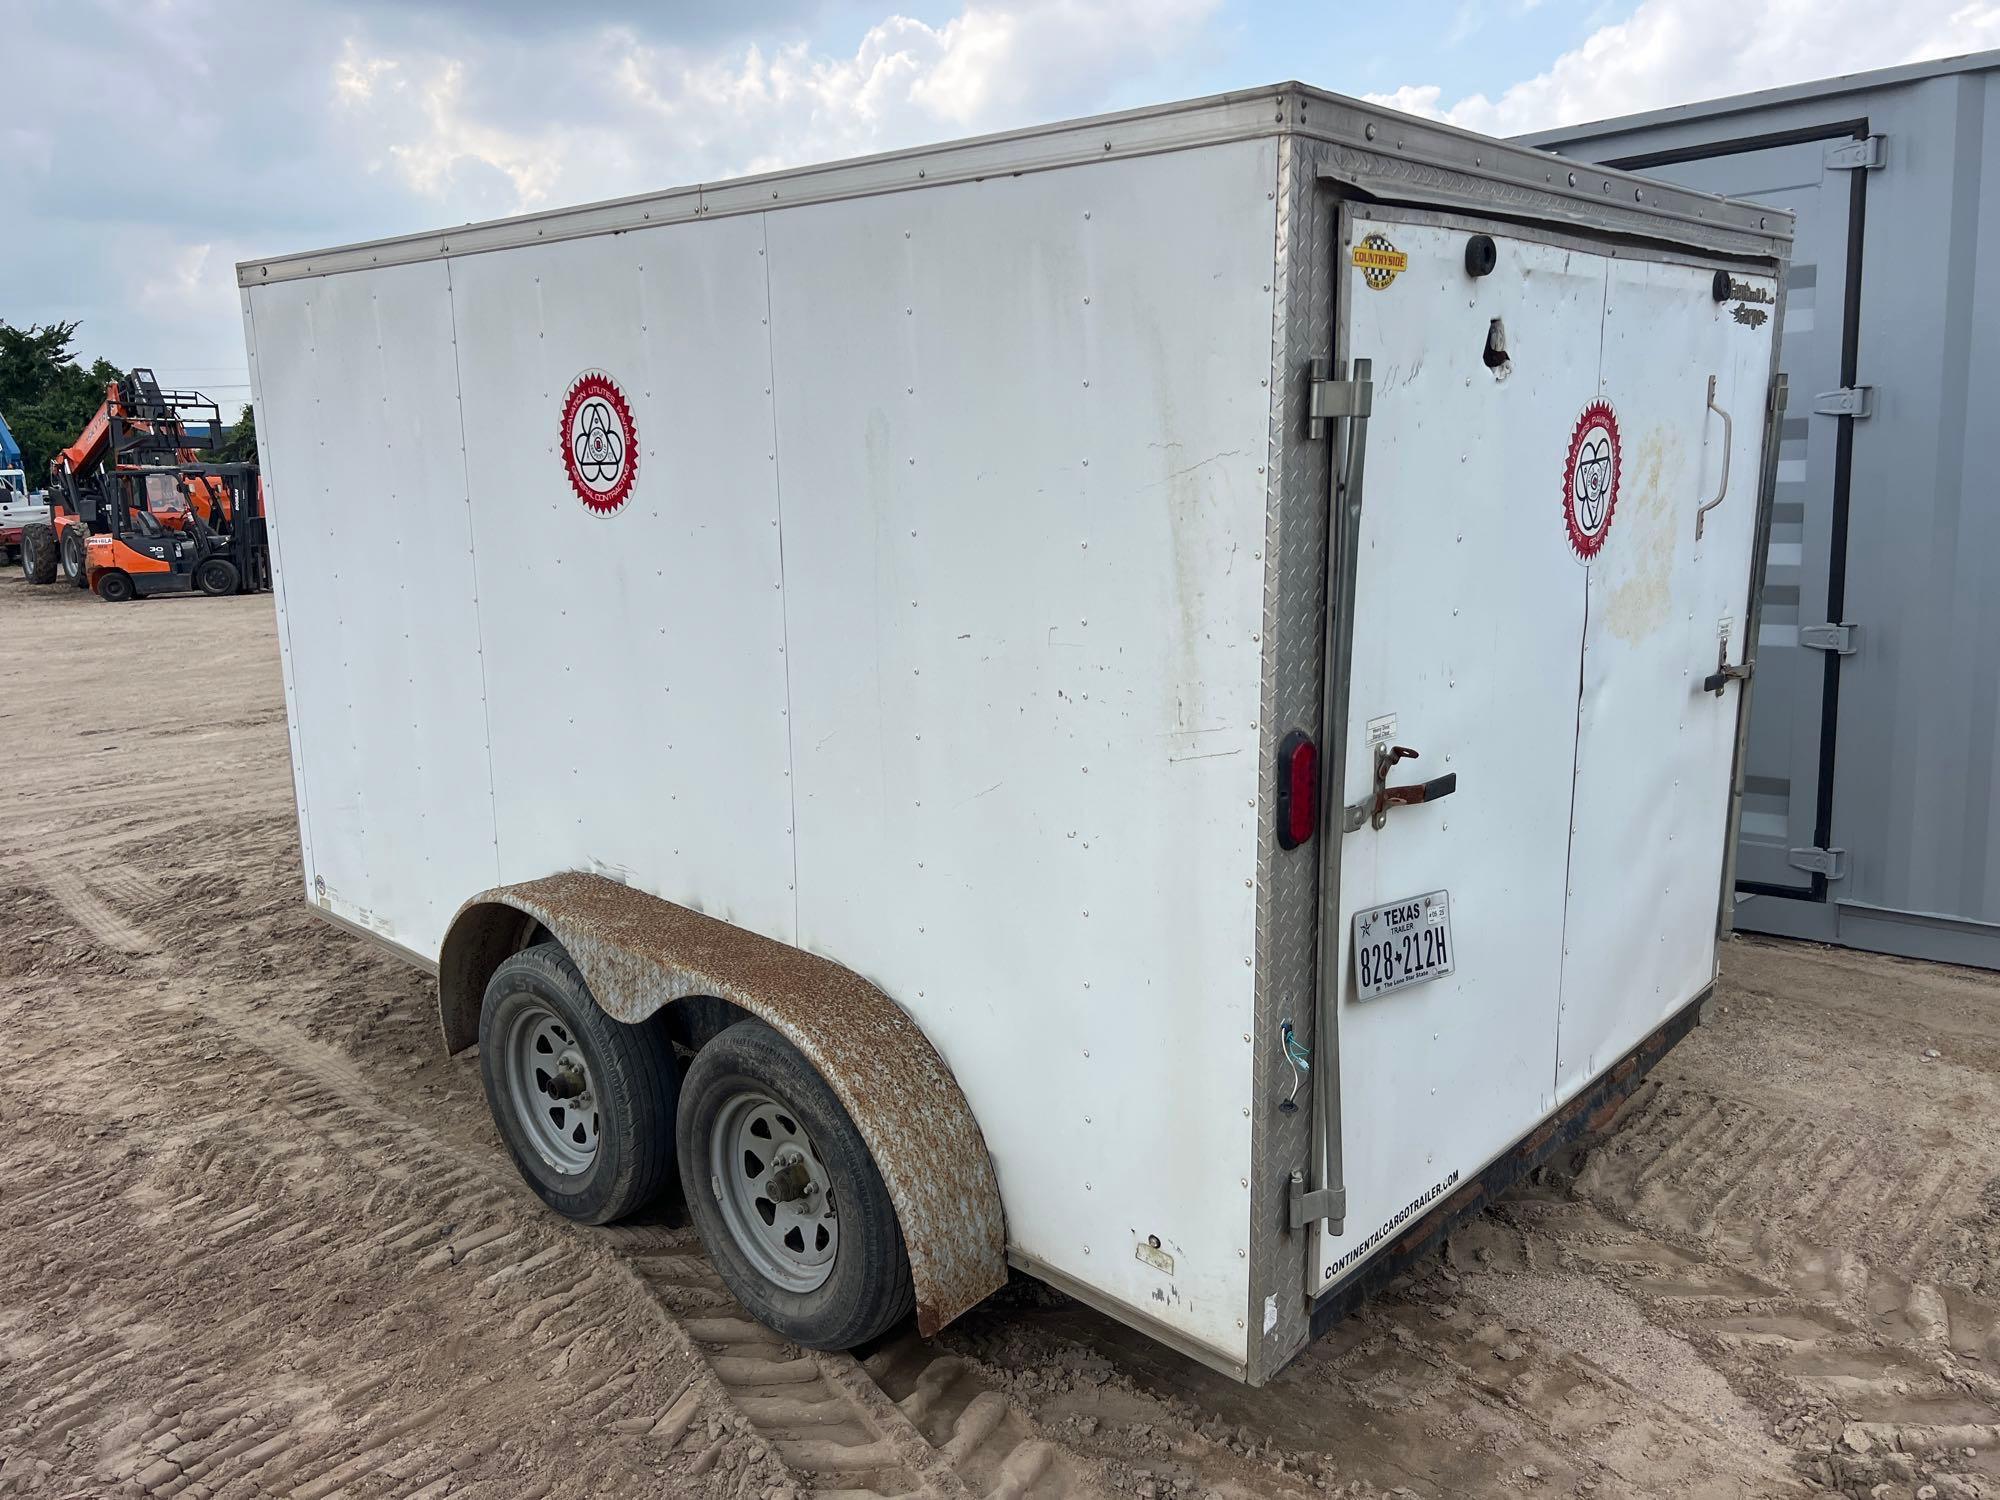 2016 CONT-FOREST RIVER TXVHW712TA CARGO TRAILER VN:026660 equipped with 7ft. X 12ft. Enclosed body,